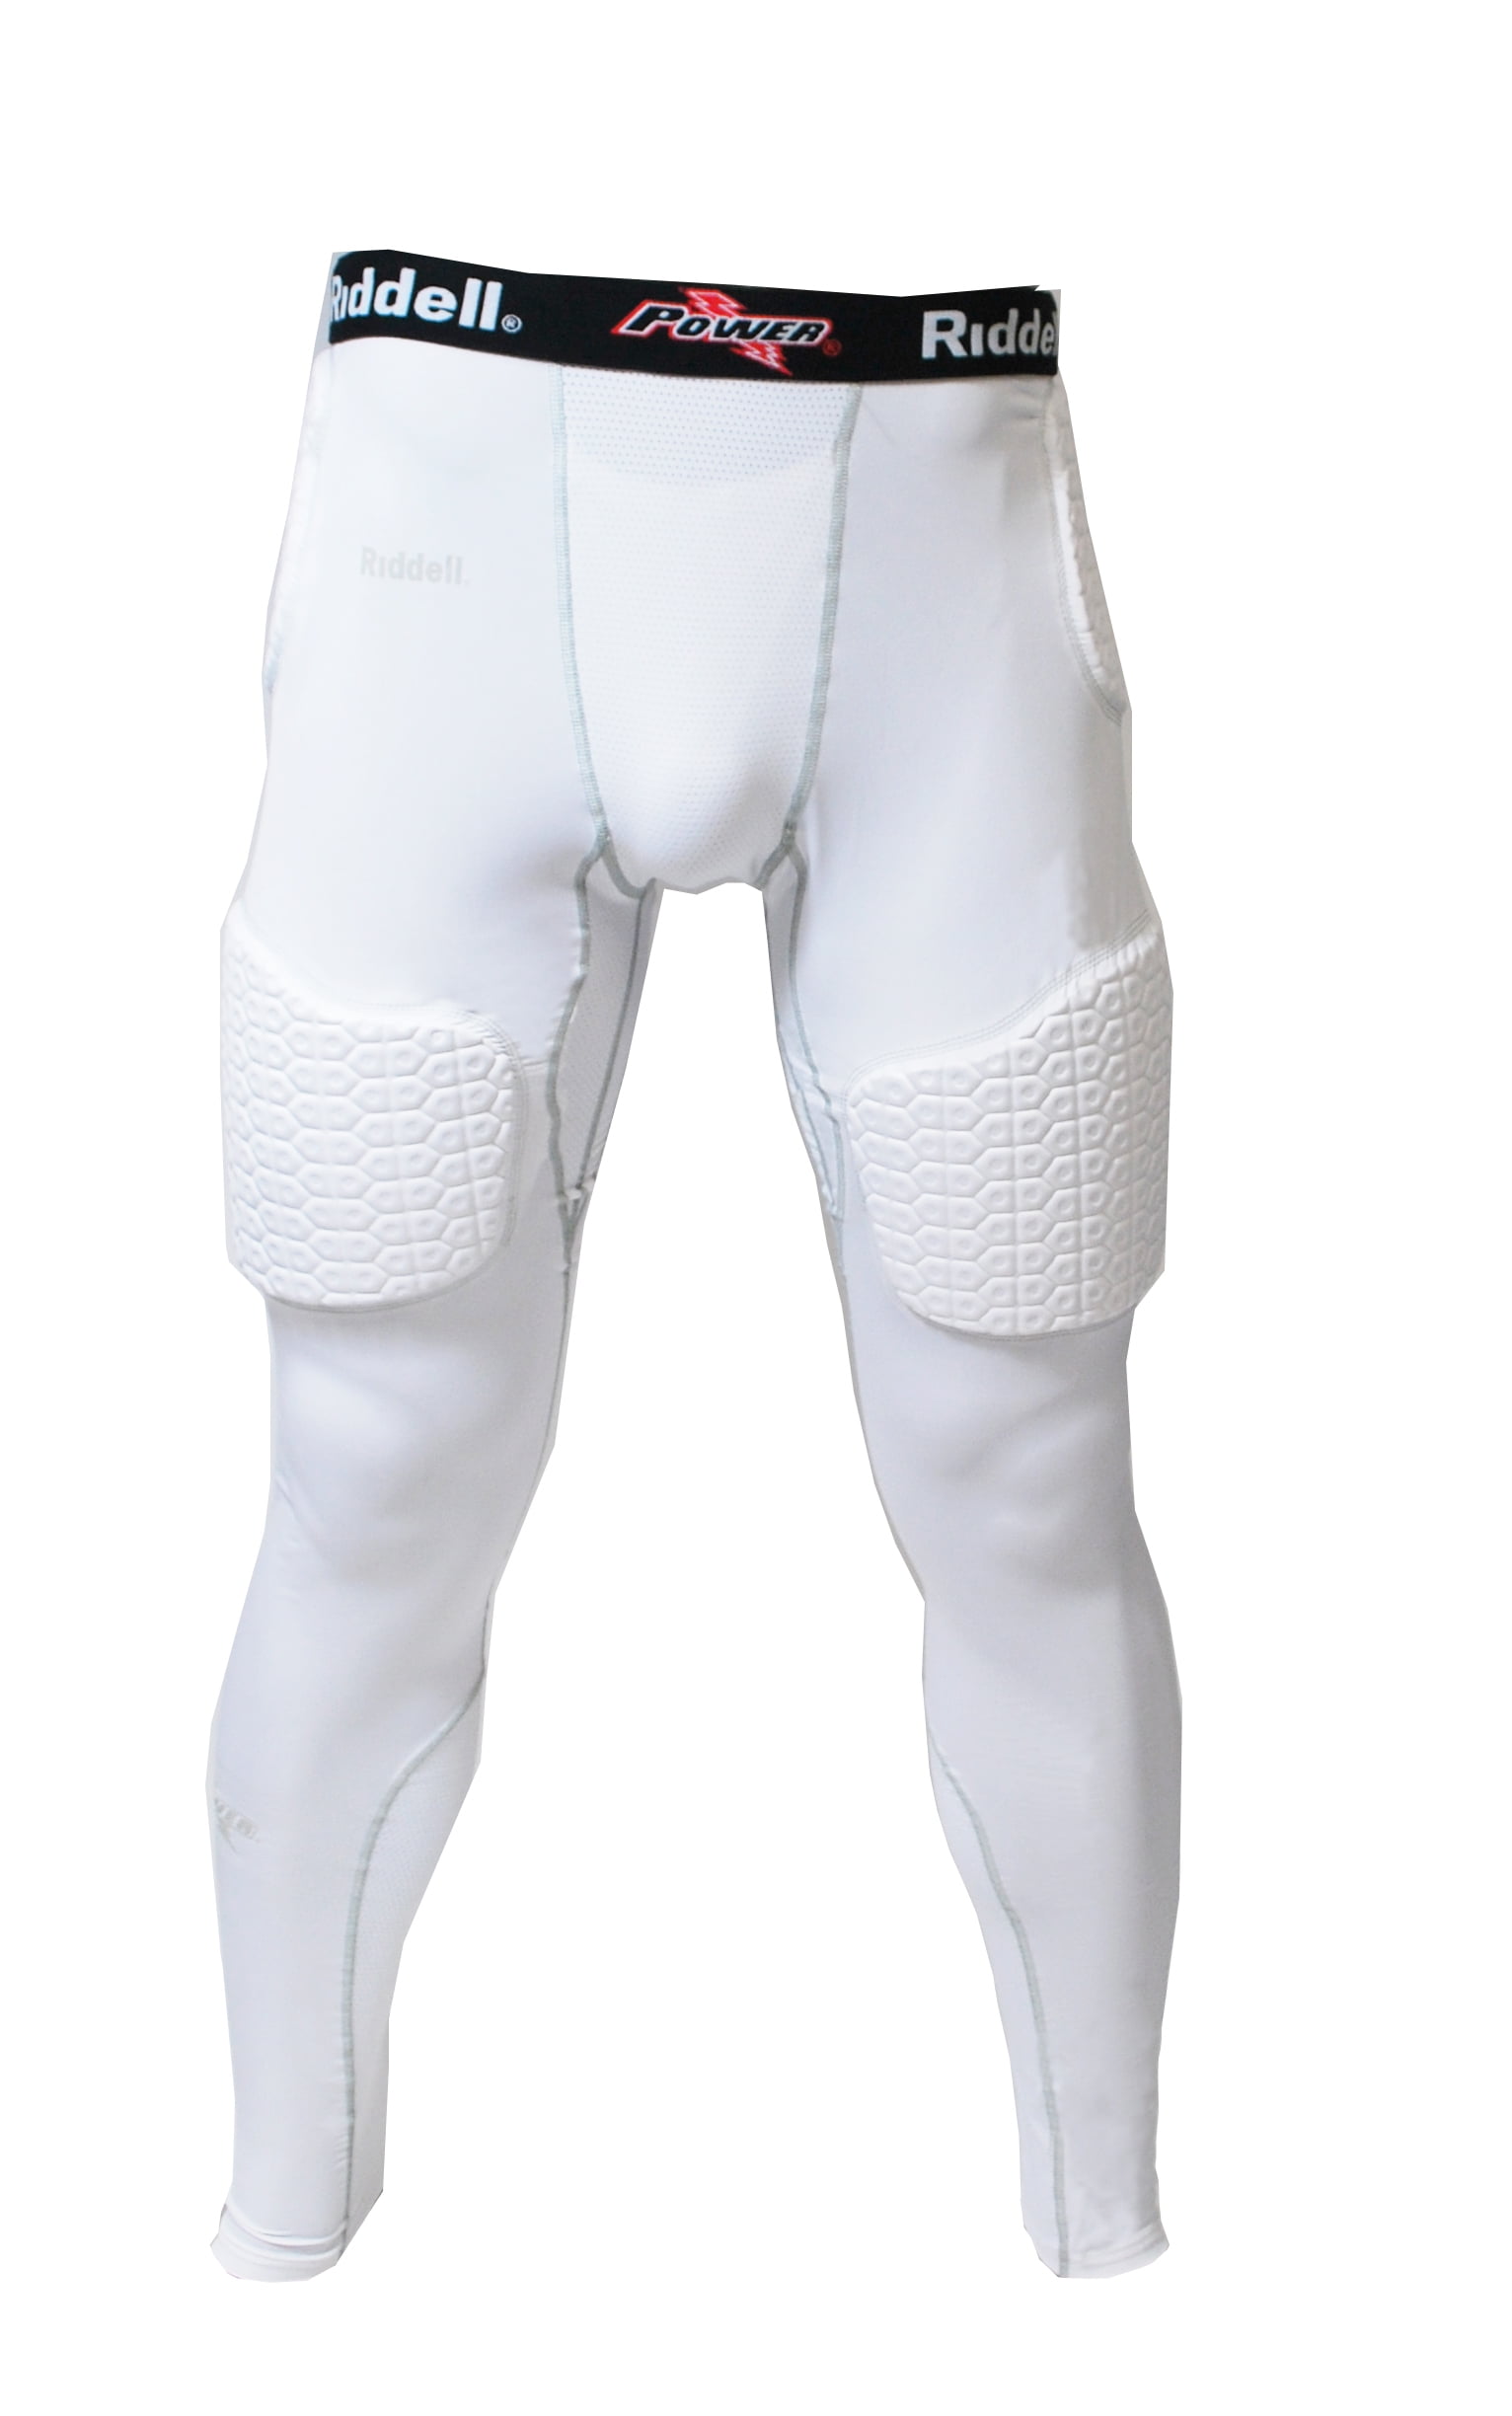 Riddell 5 Piece Integrated Football Tights,White, Adult Small 